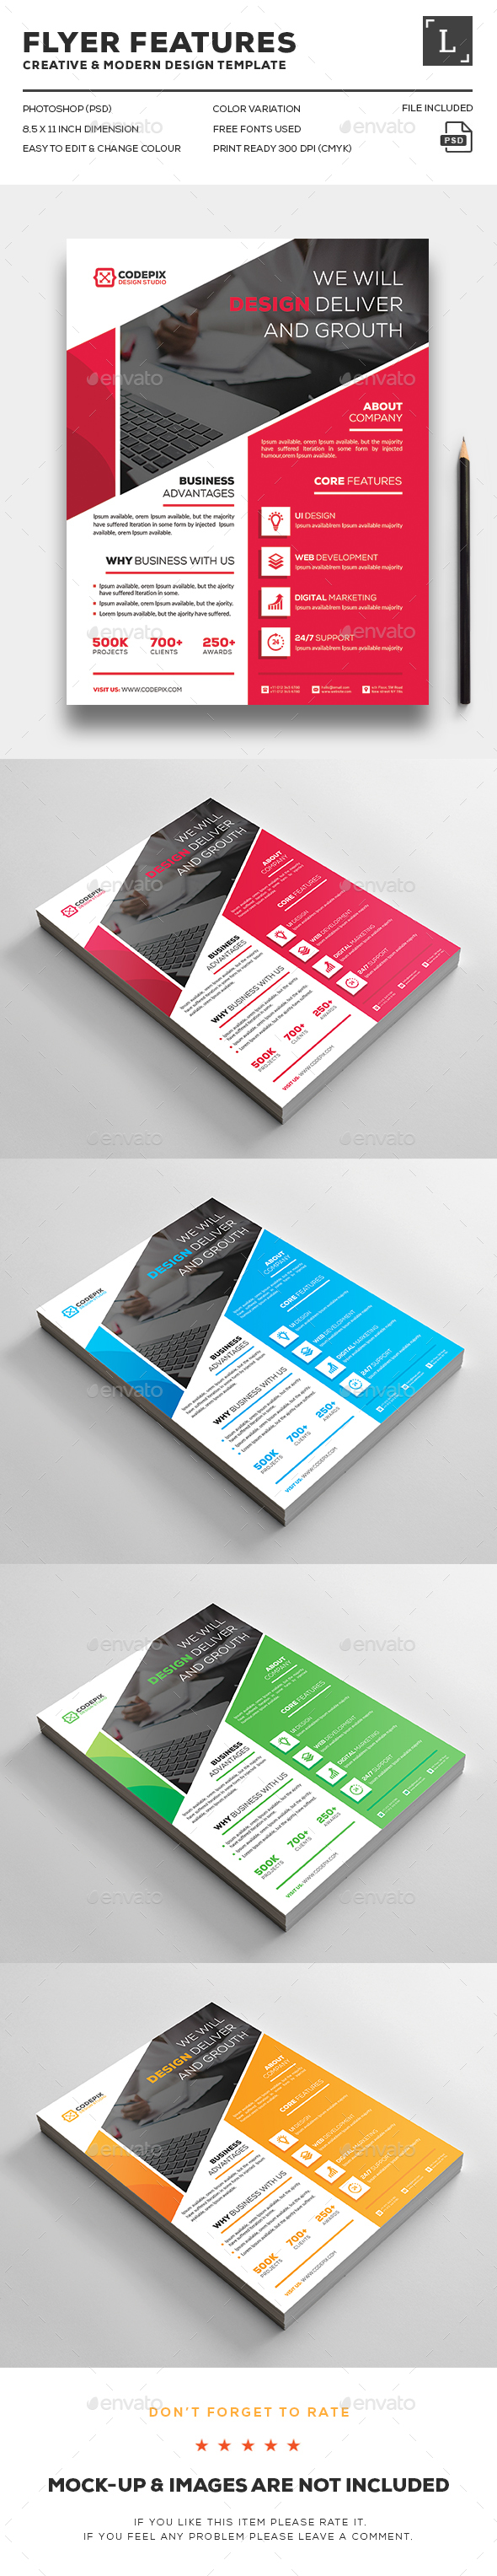 flyer template psd free